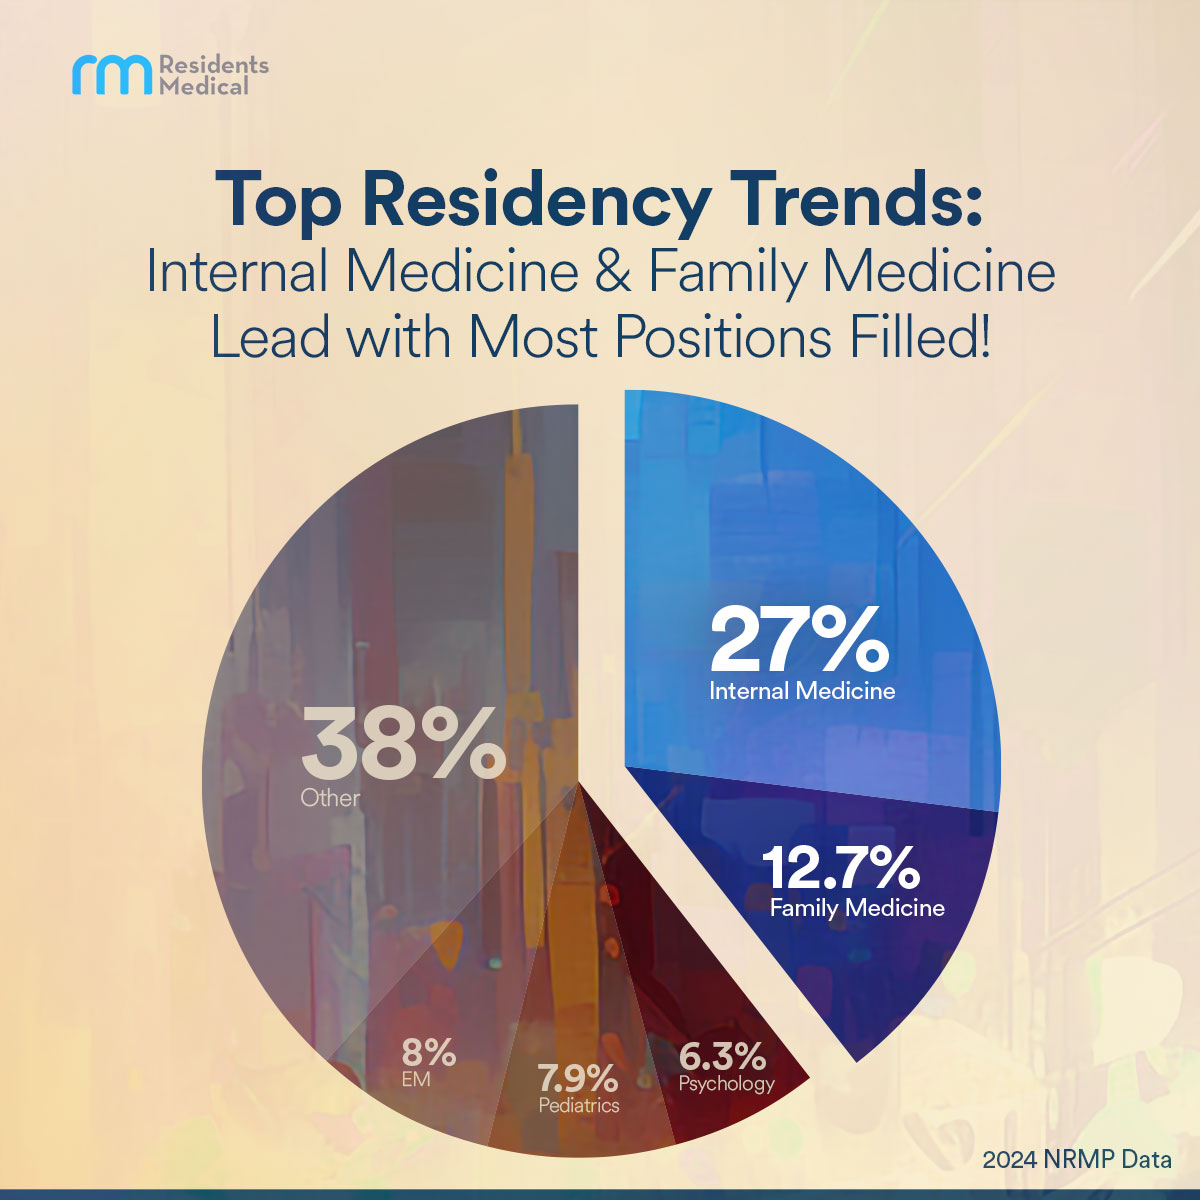 New NRMP data illuminates the dynamic landscape of U.S. medicine. With IM and FM leading the way, their growing demand can be seen.

However, with heightened demand comes increased competition. Stay ahead of the curve with Residents Medical's placement integration on your side.